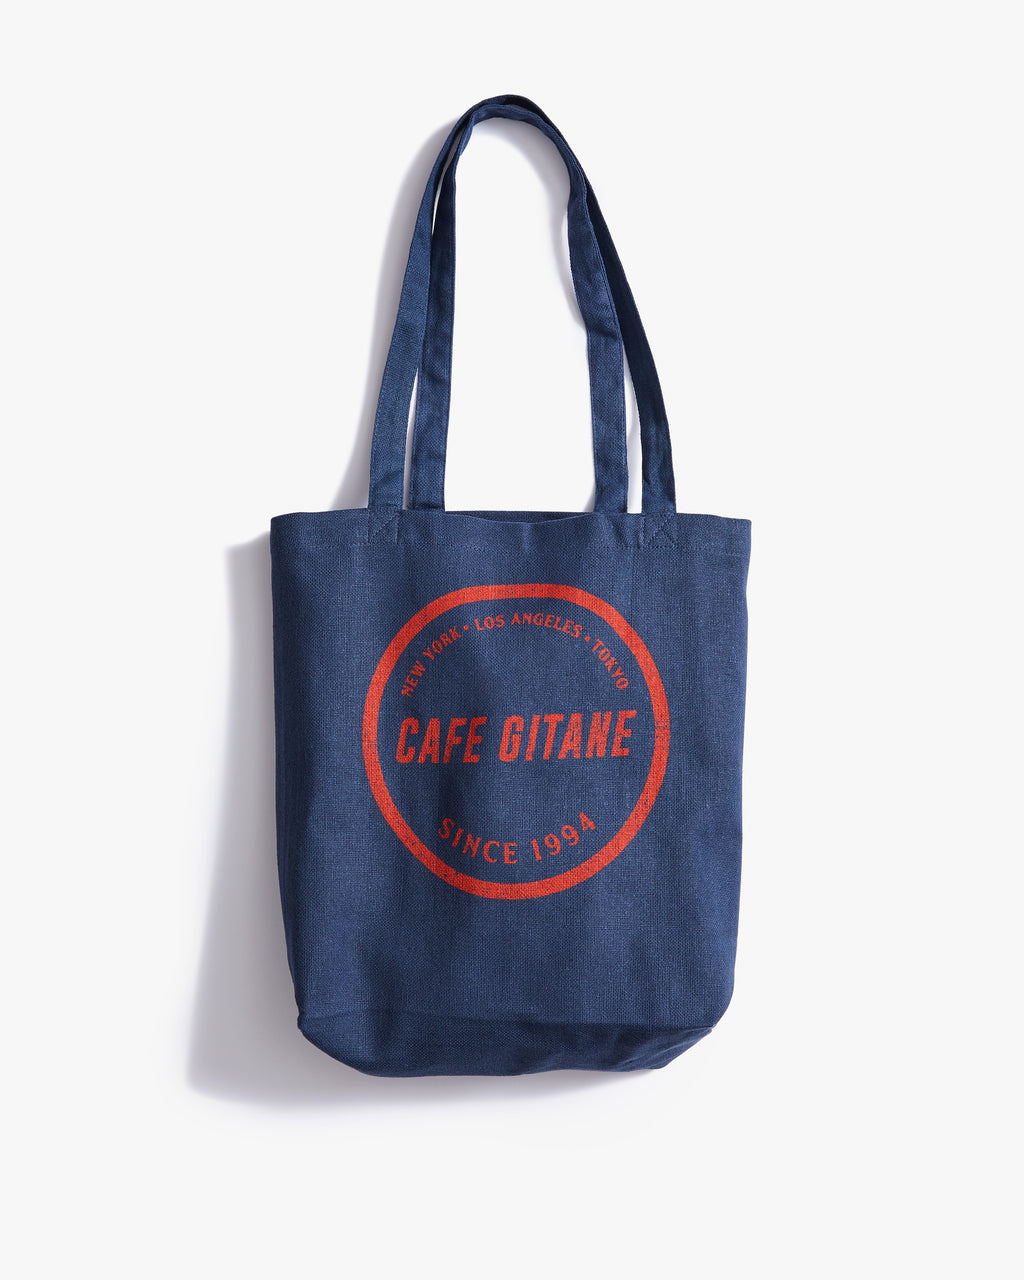 The Cafe Gitane Stampe Logo Tote Bag is 100% recycled cotton and made in the USA. The classic market bag is navy blue and printed with a red logo in a stamped structure, with non-toxic ink. The logo features each city Cafe Gitane has a location in: New York, Los Angeles, and Tokyo, as well as when the first location opened: 1994. 